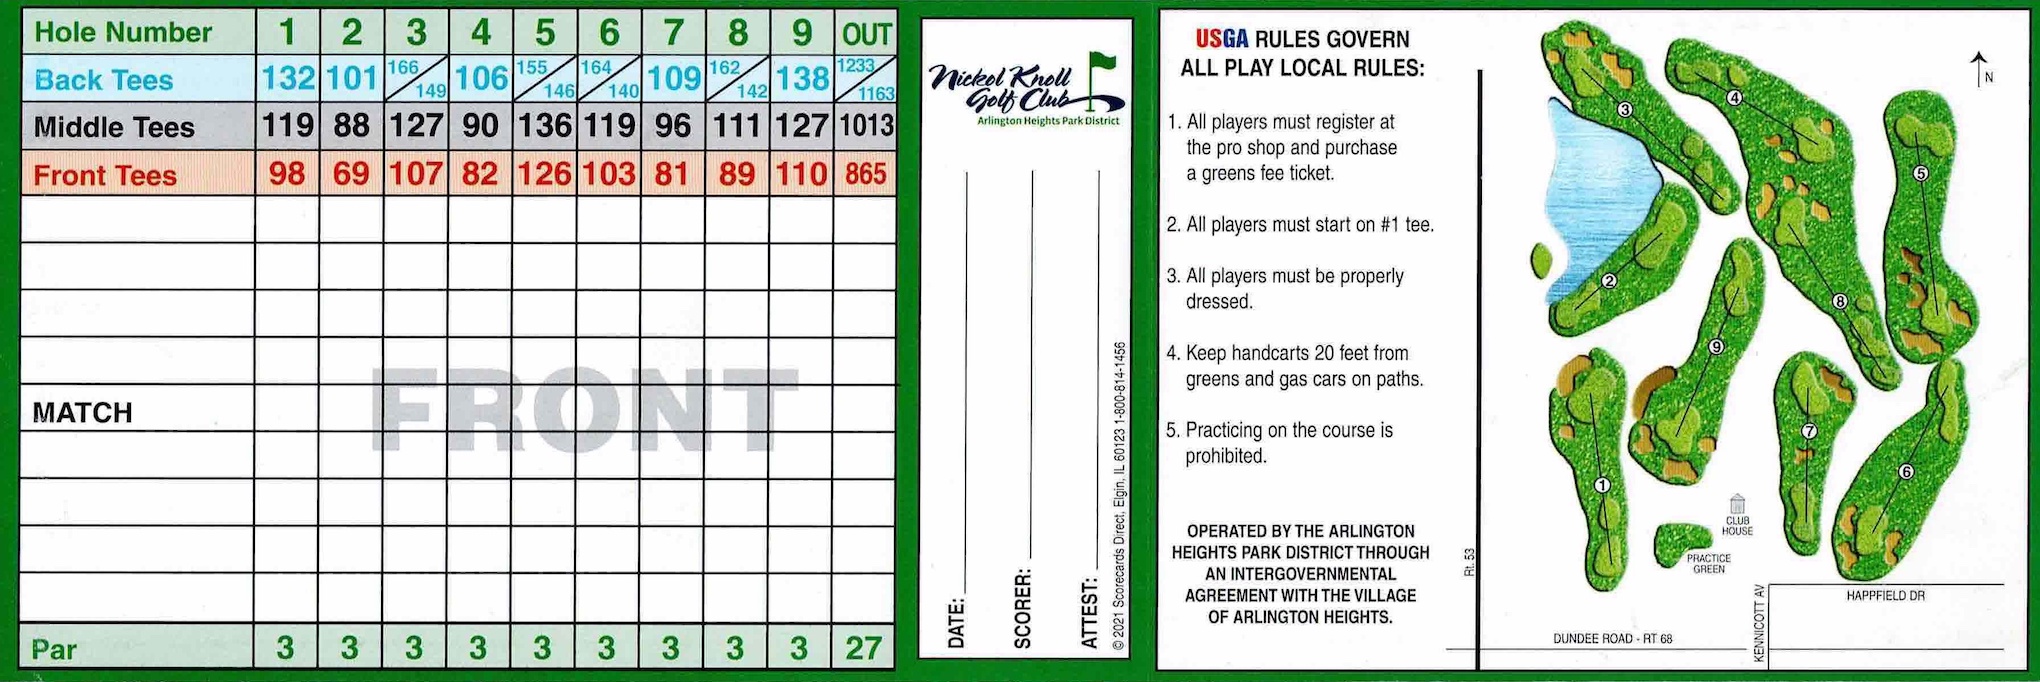 Scan of the scorecard from Nickol Knoll Golf Club in Arlington Heights, Illinois. 